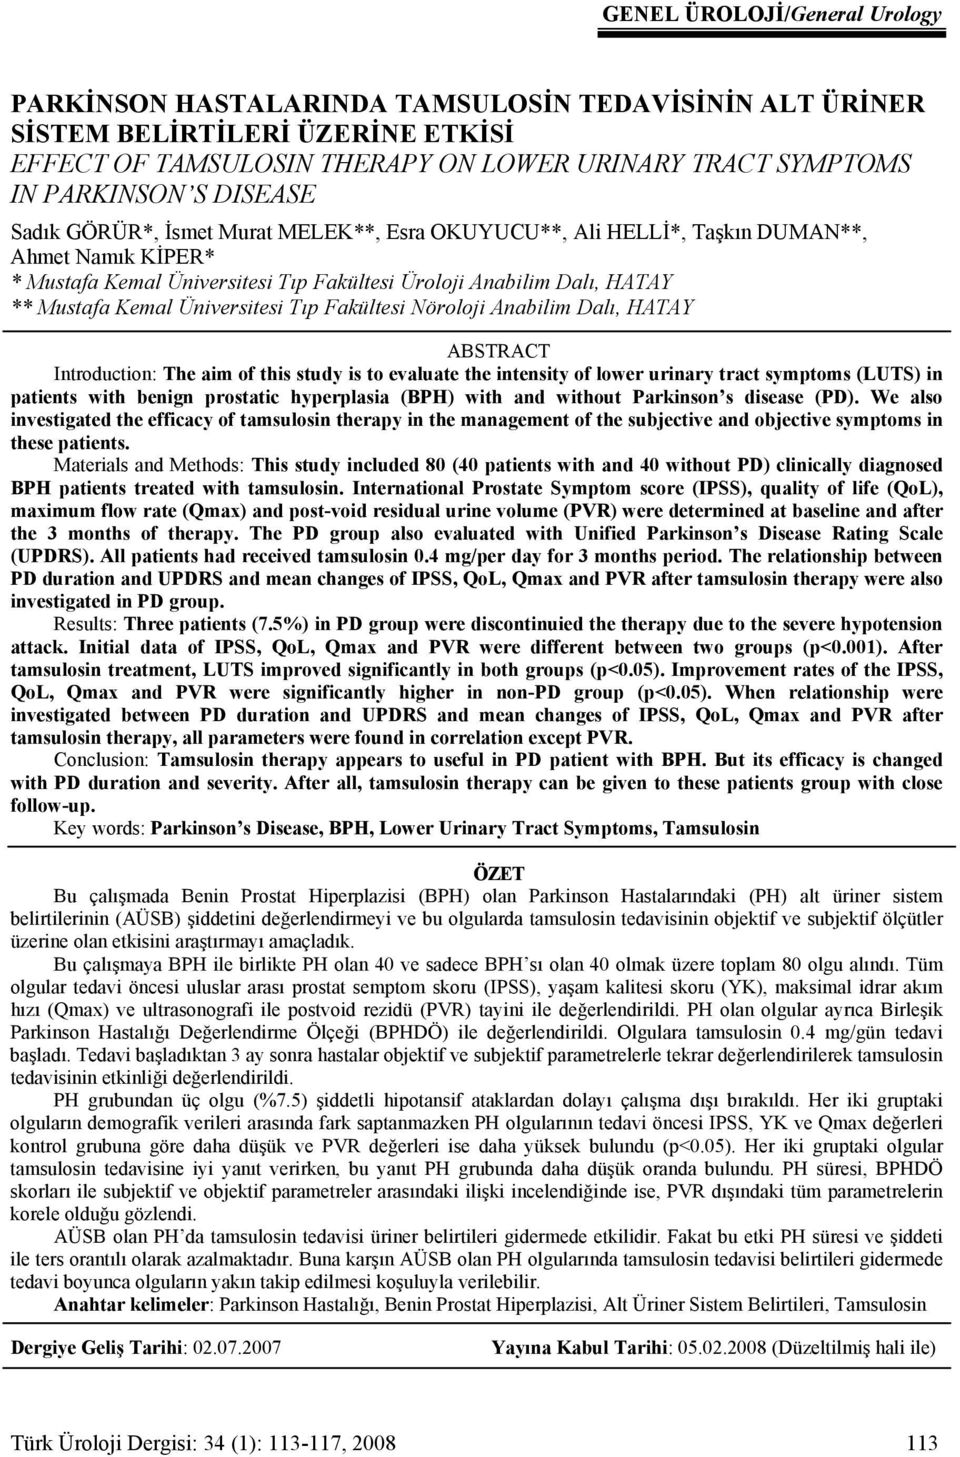 Üniversitesi Tıp Fakültesi Nöroloji Anabilim Dalı, HATAY ABSTRACT Introduction: The aim of this study is to evaluate the intensity of lower urinary tract symptoms (LUTS) in patients with benign